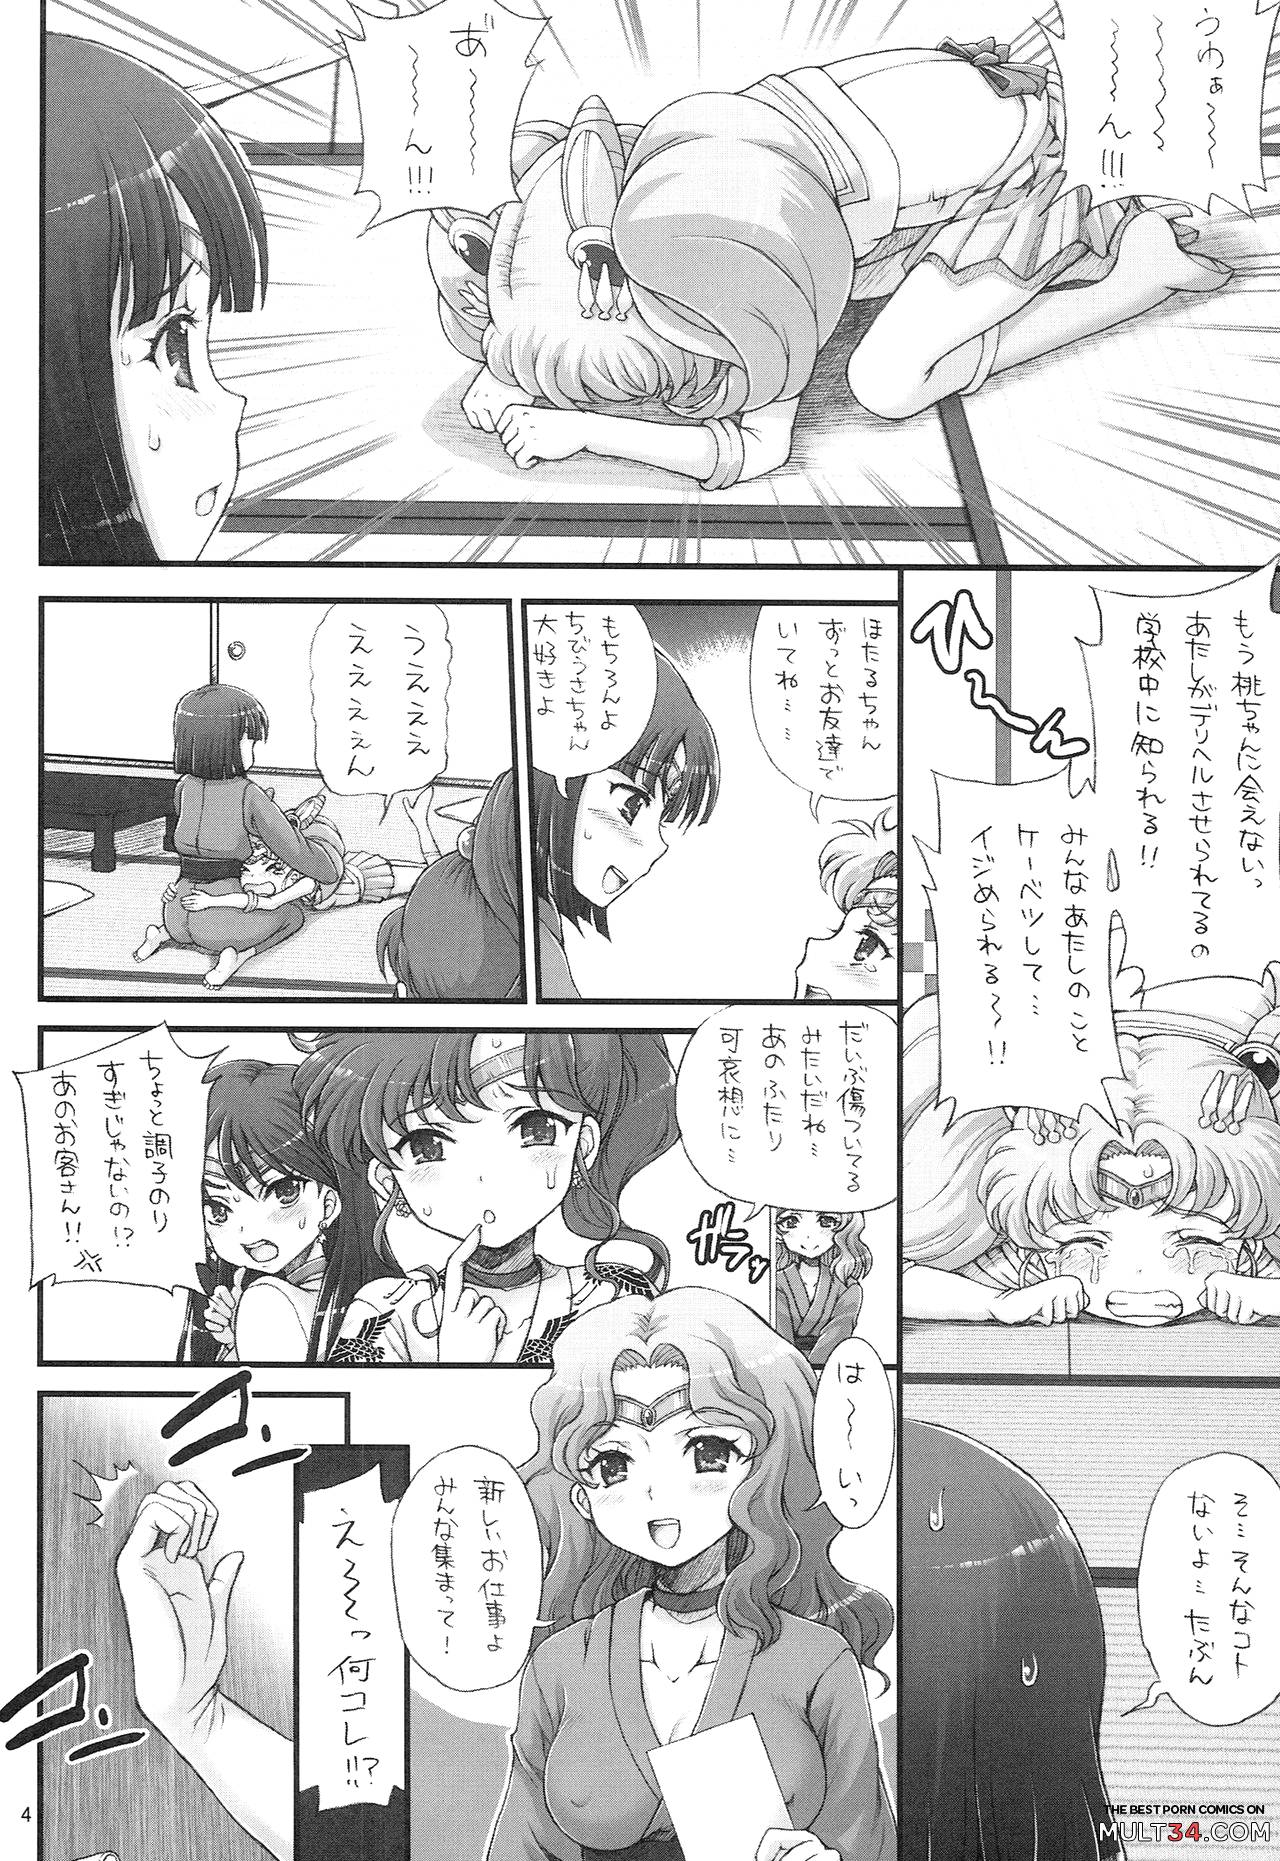 Sailor Delivery Health AS page 3